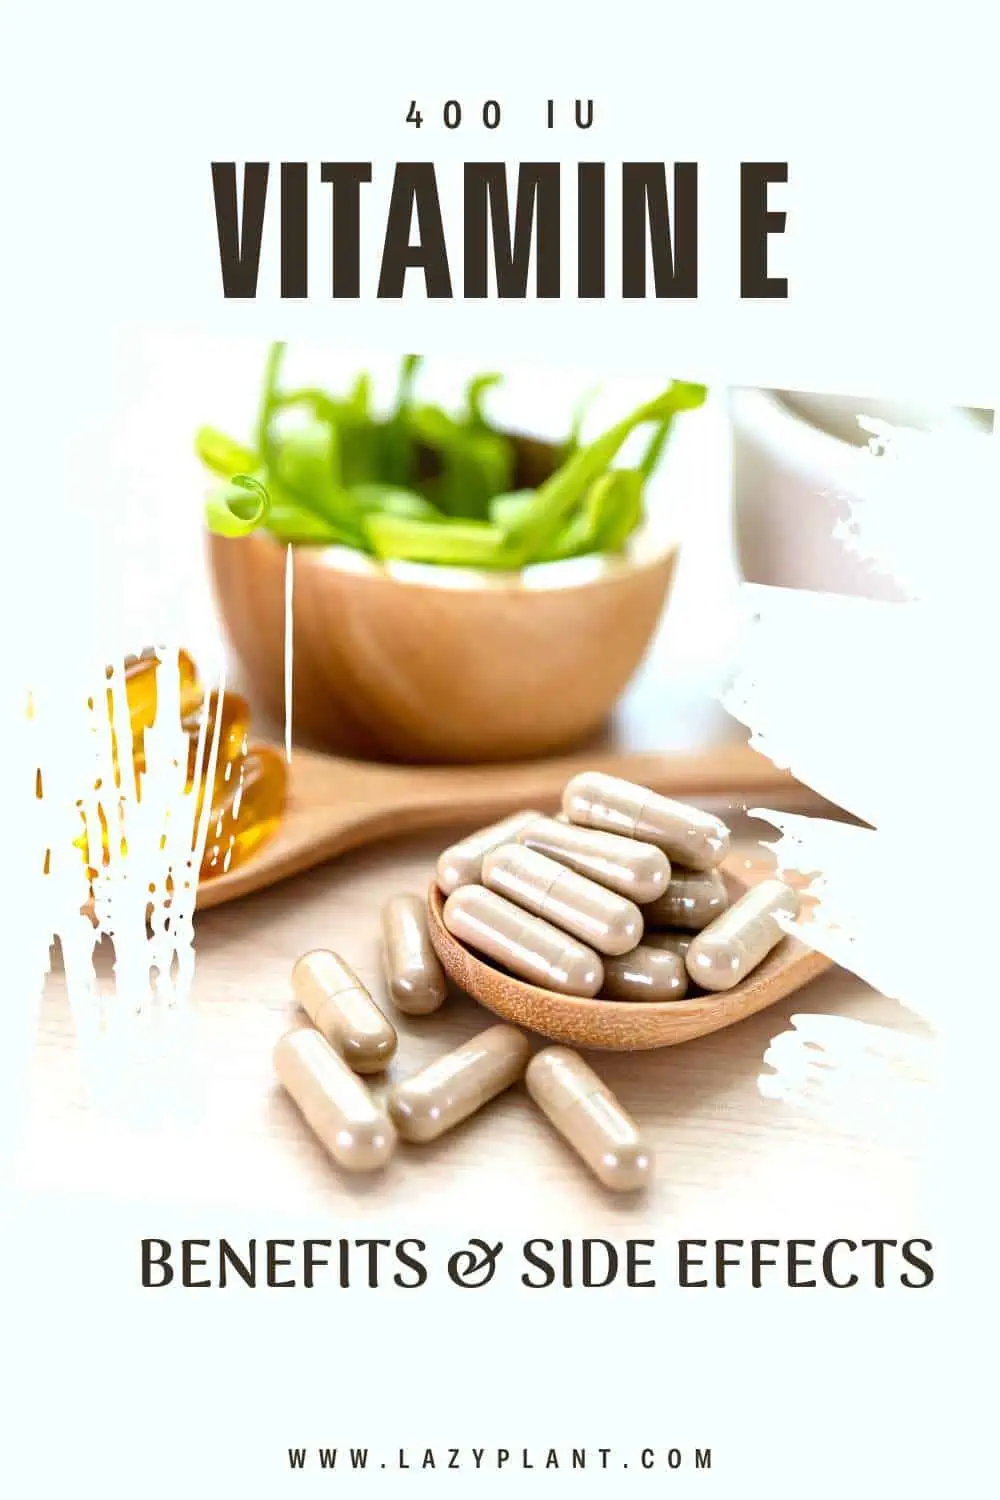 Can I get too much vitamin E from food or supplements?